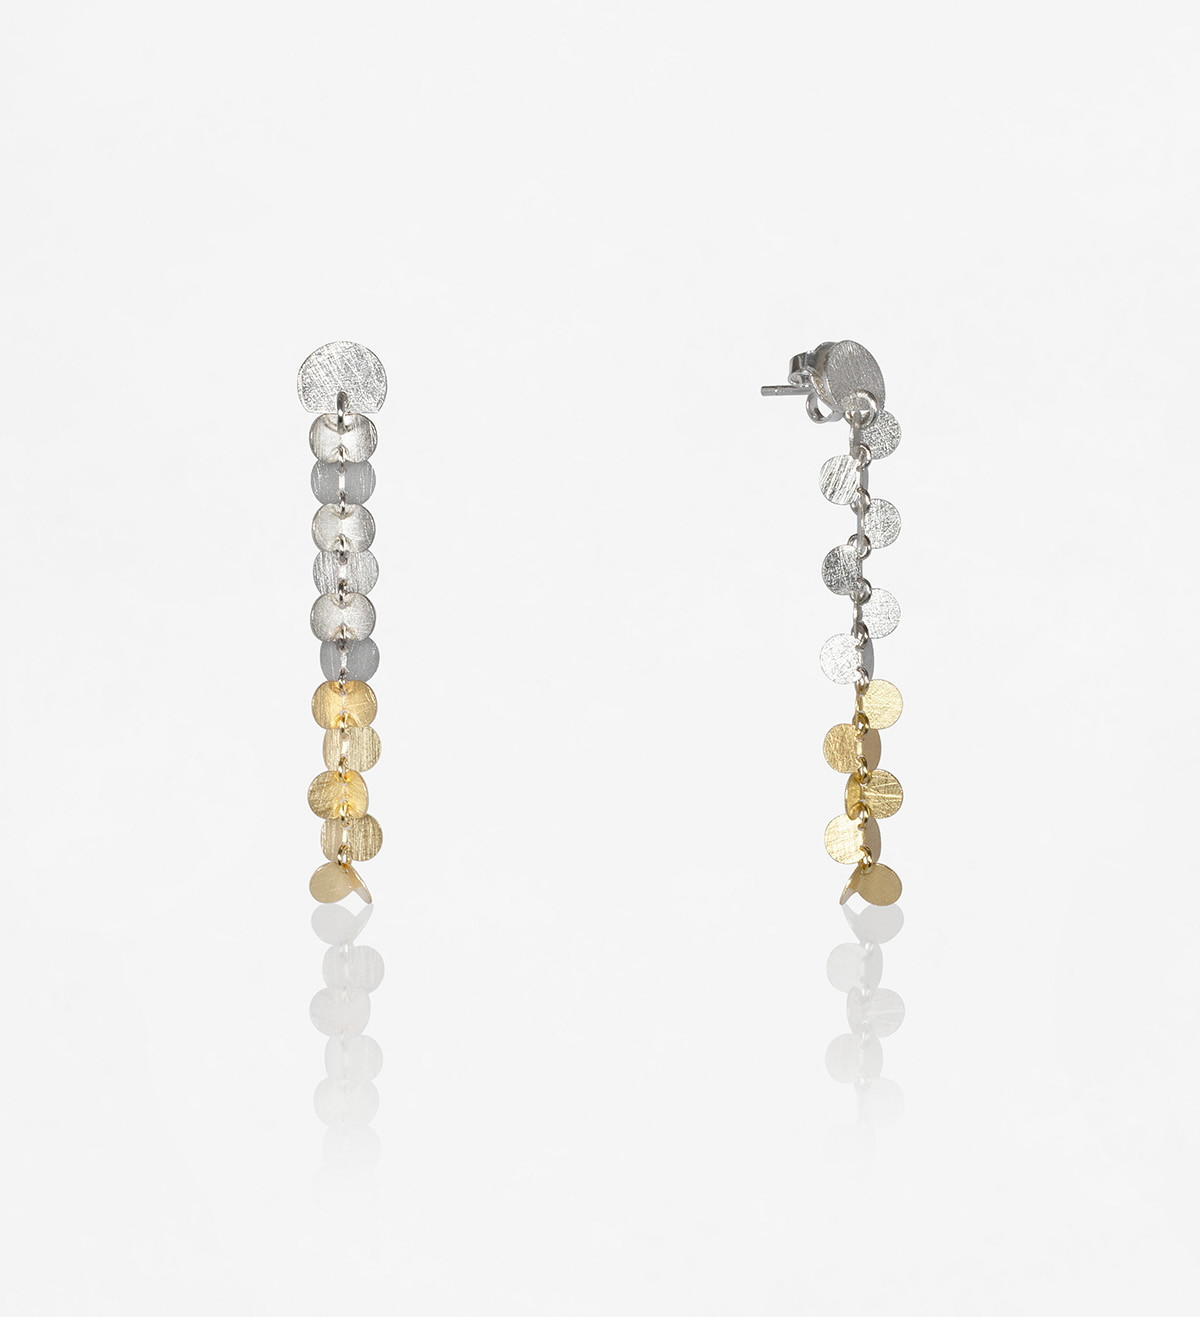 18k gold and silver earrings Papallones 50mm